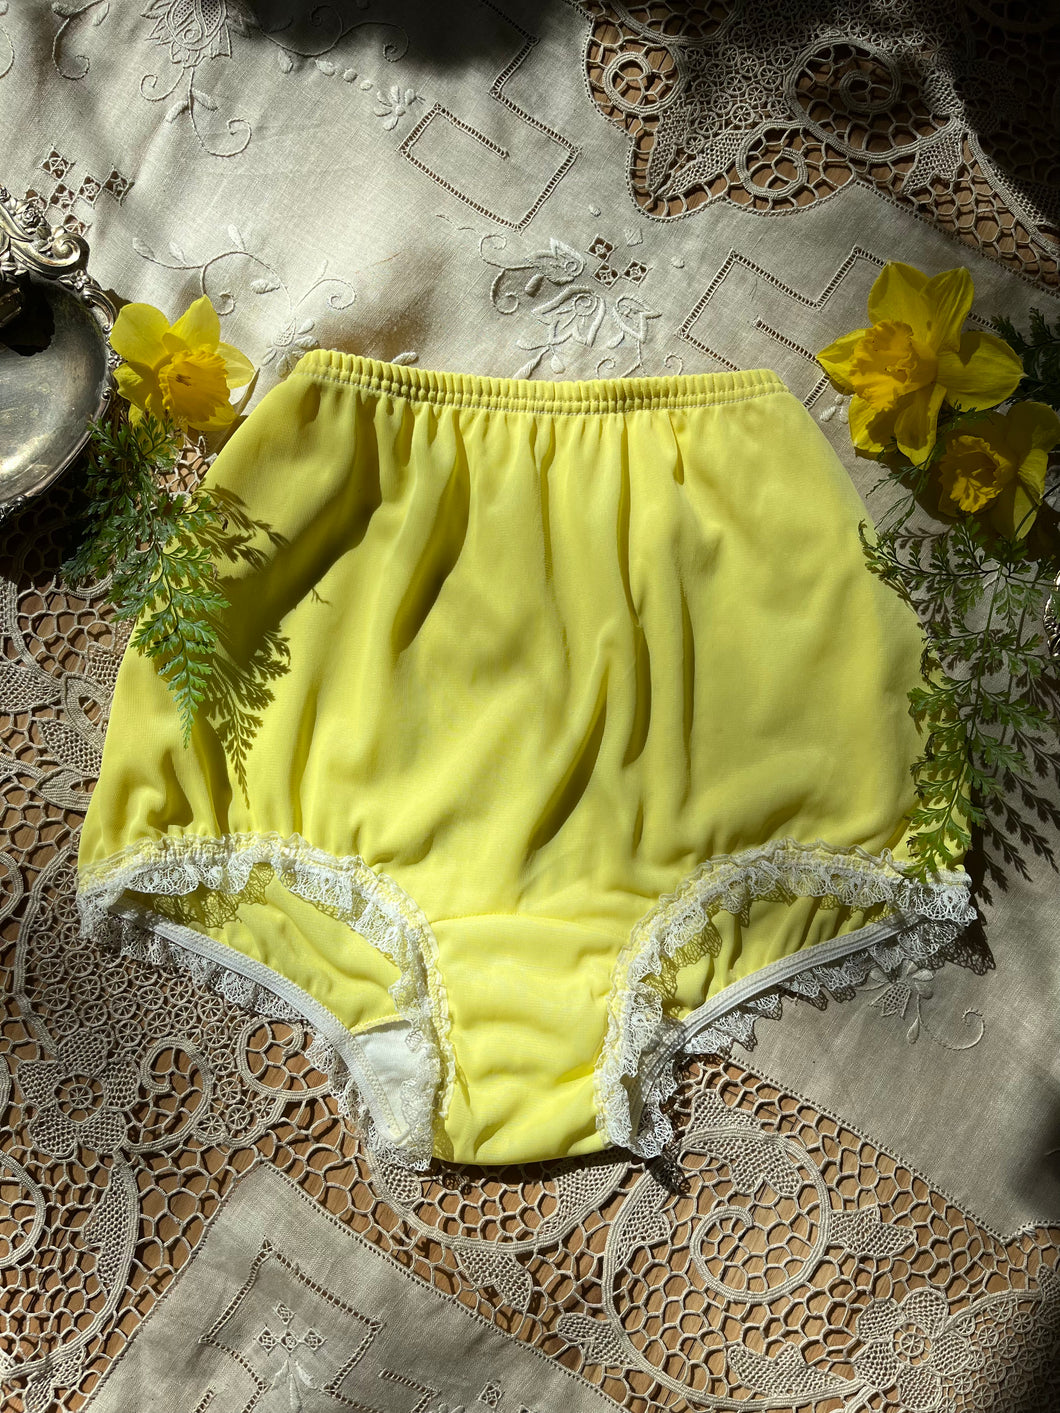 Darling 1960’s vintage Daffodil Yellow Nylon and Lace Granny Panties